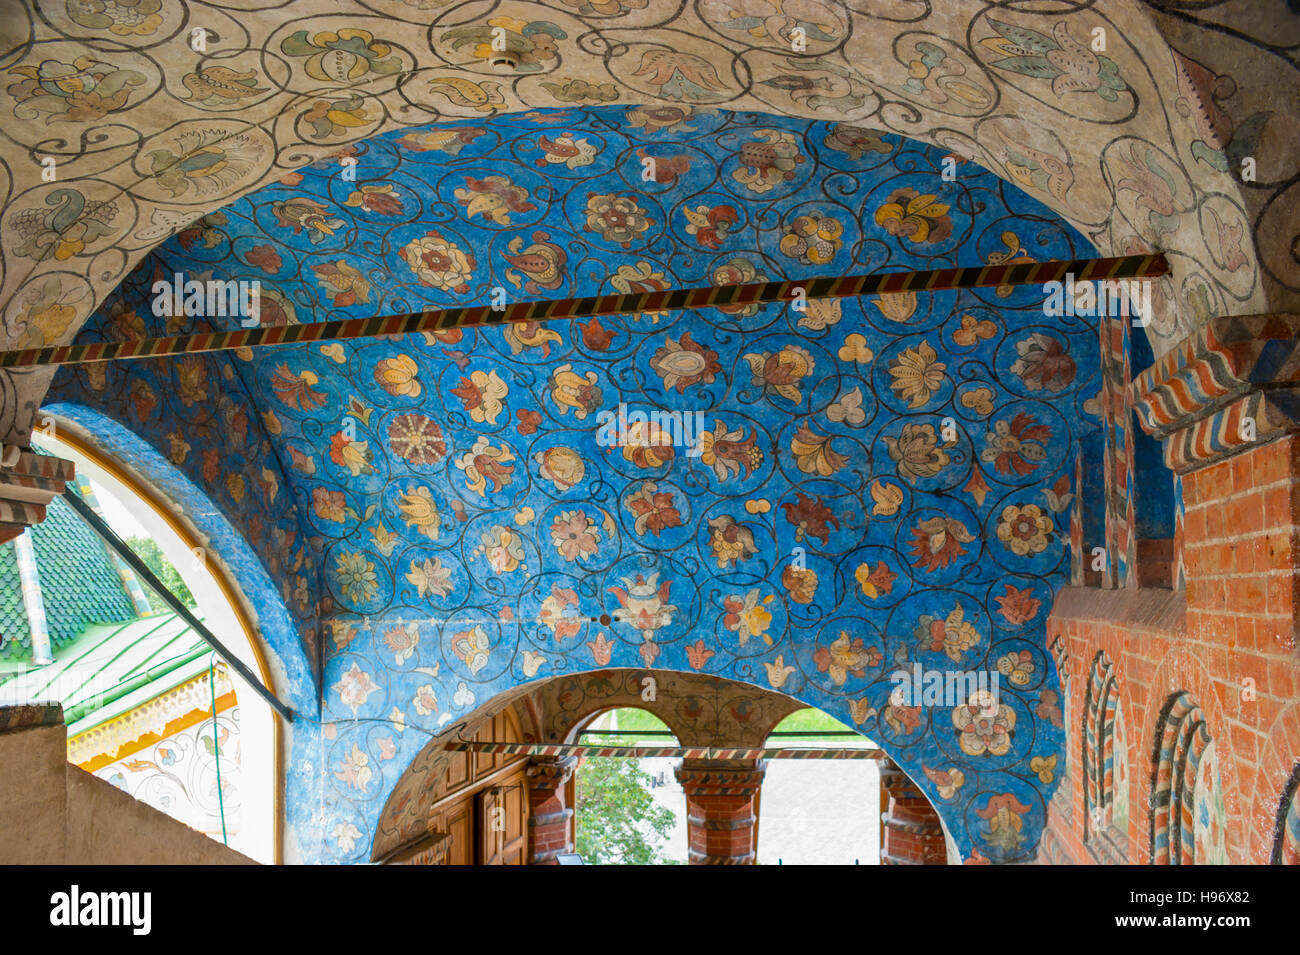 The galleries of St. Basil's Cathedral decorated with murals in old slavic style. Stock Photo